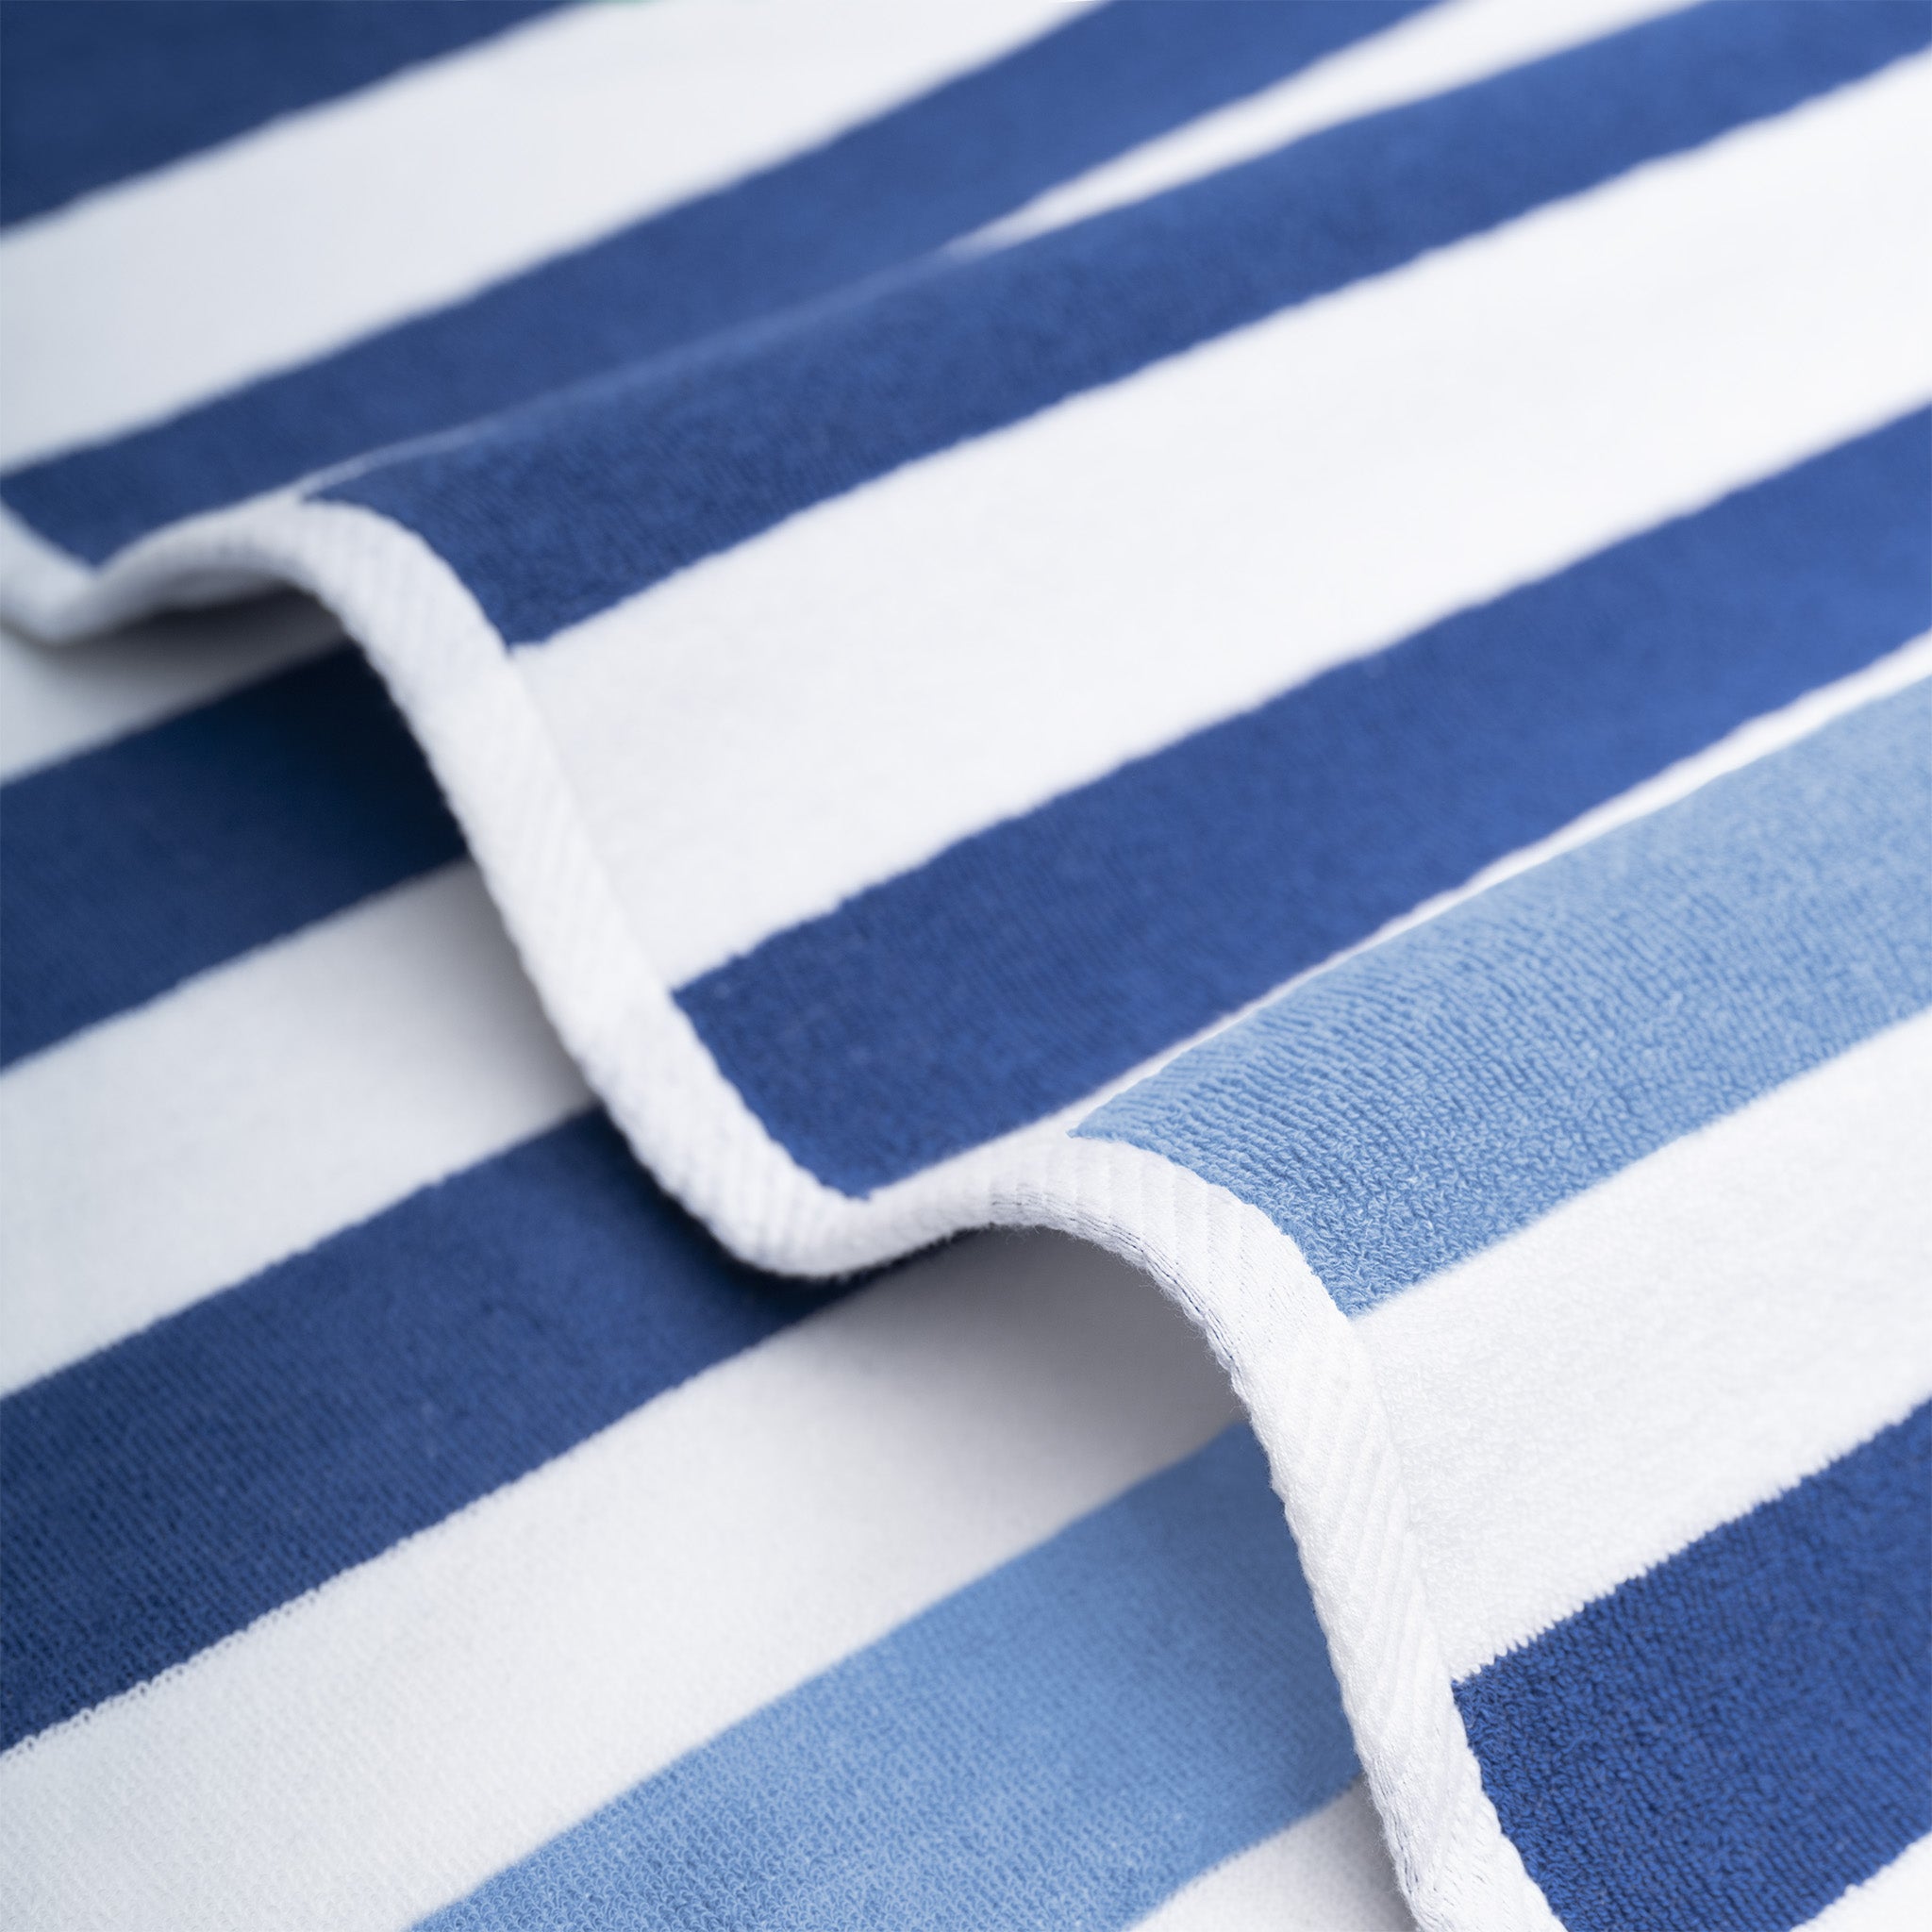 American Soft Linen 100% Cotton 4 Pack Beach Towels Cabana Striped Pool Towels -navy-sky-5